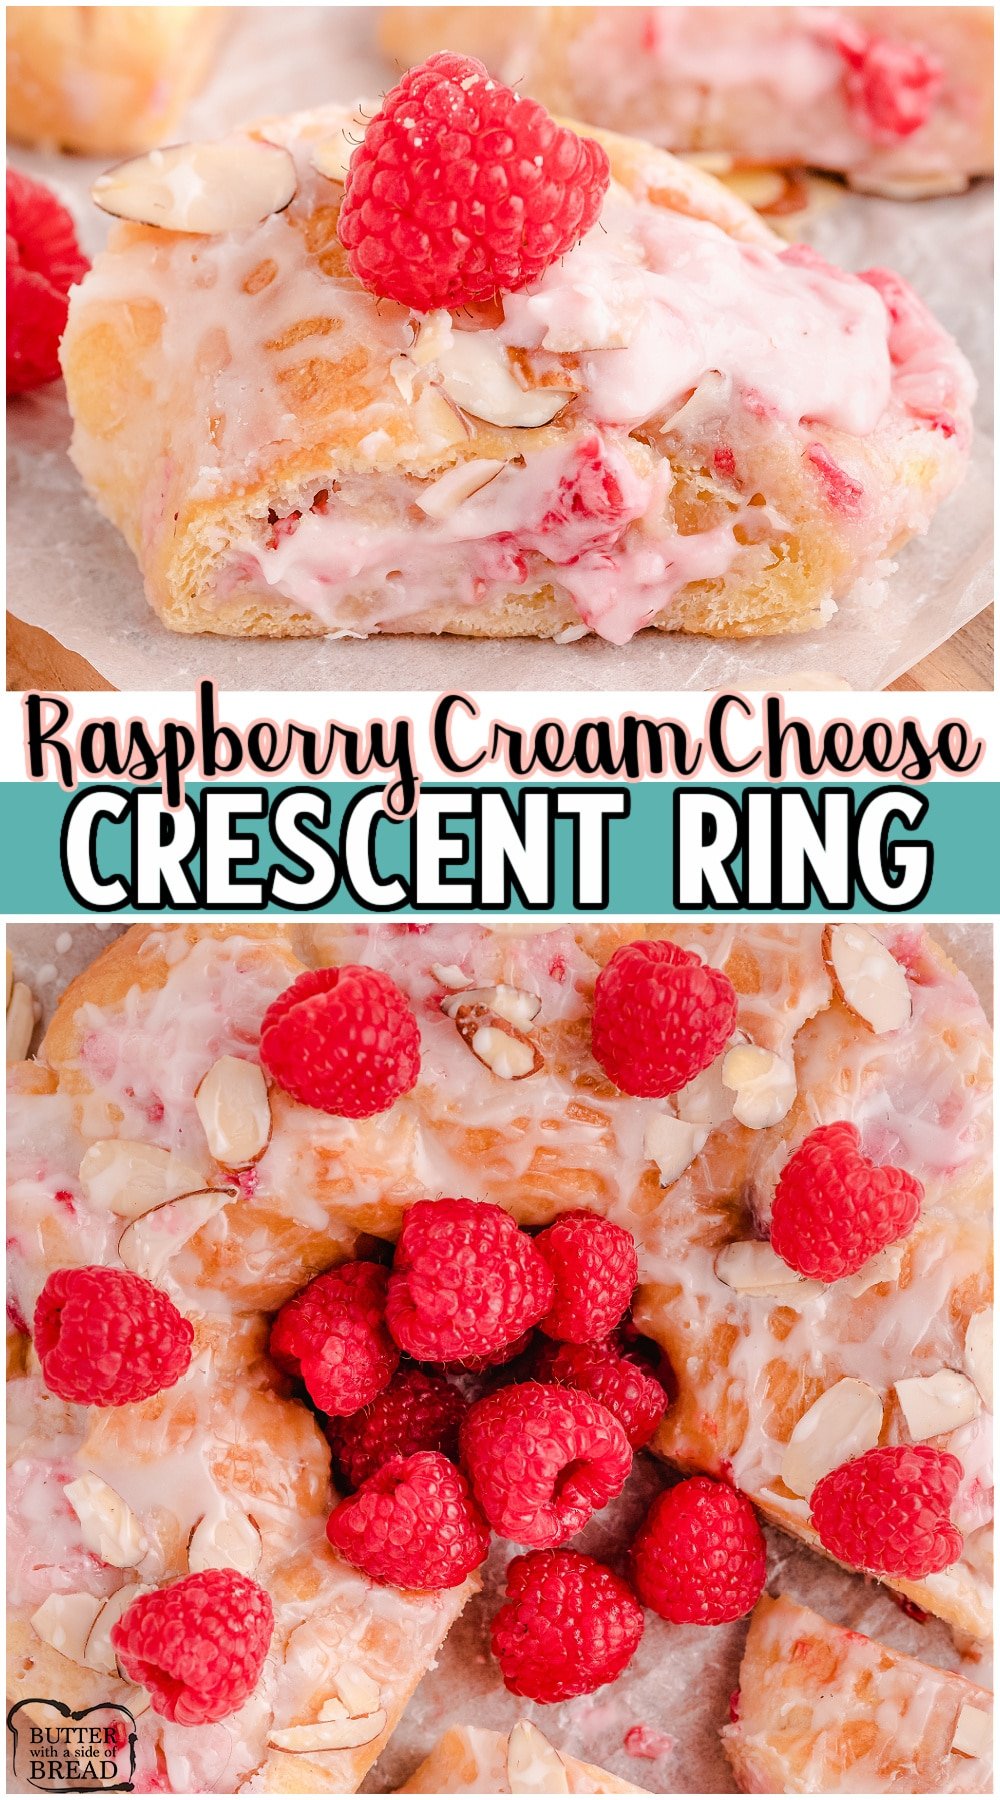 Raspberry Cream Cheese Crescent Ring is an easy danish recipe made easy with crescent rolls, cream cheese & raspberries. Perfect for holidays, brunch, dessert, or anytime! 